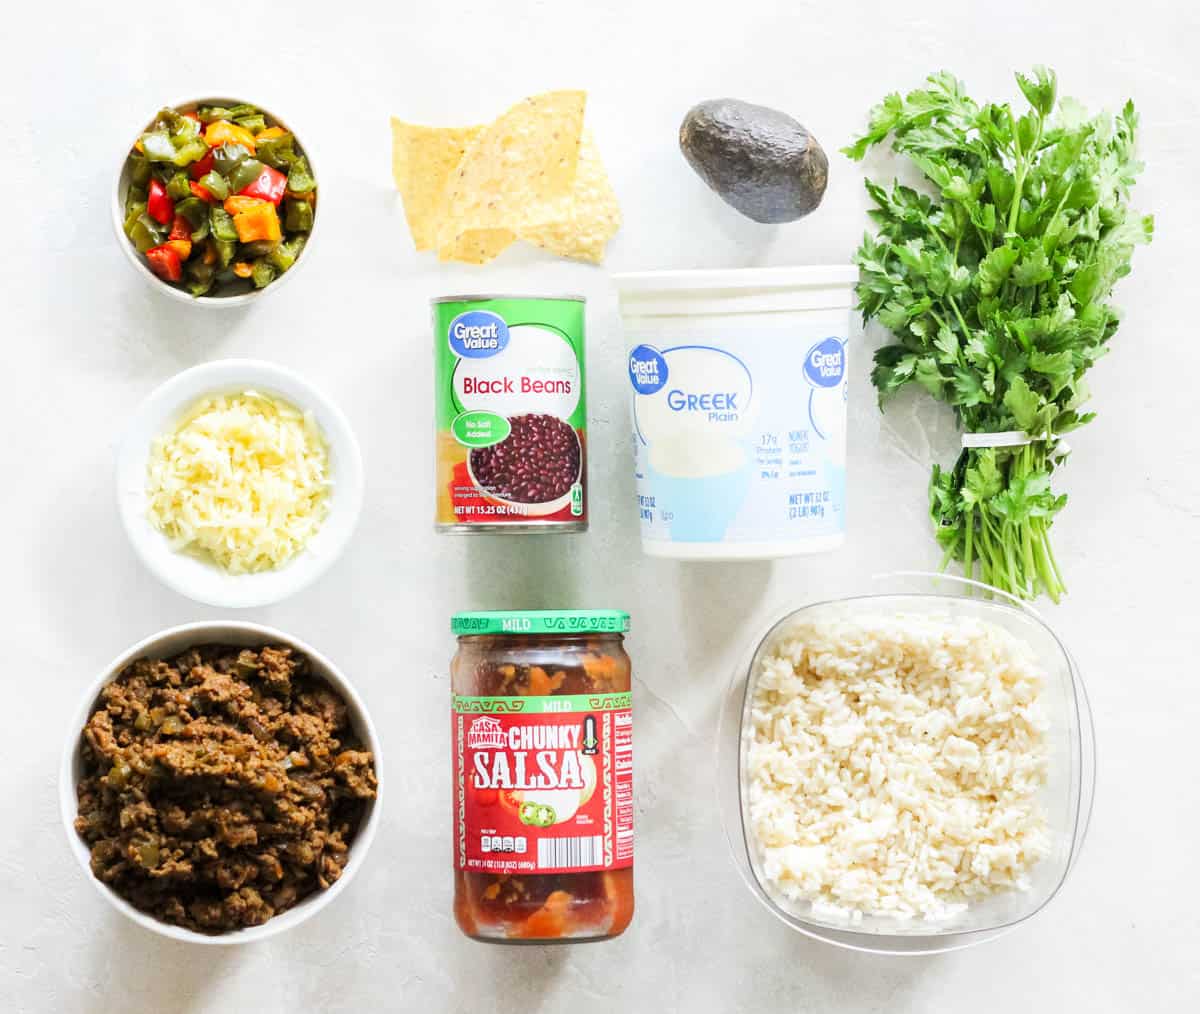 white counter with ingredients to make taco bowls including leftover taco meat, grated cheese, bell peppers, tortilla chips, black beans, salsa, rice, greek yogurt, cilantro, and an avocado.